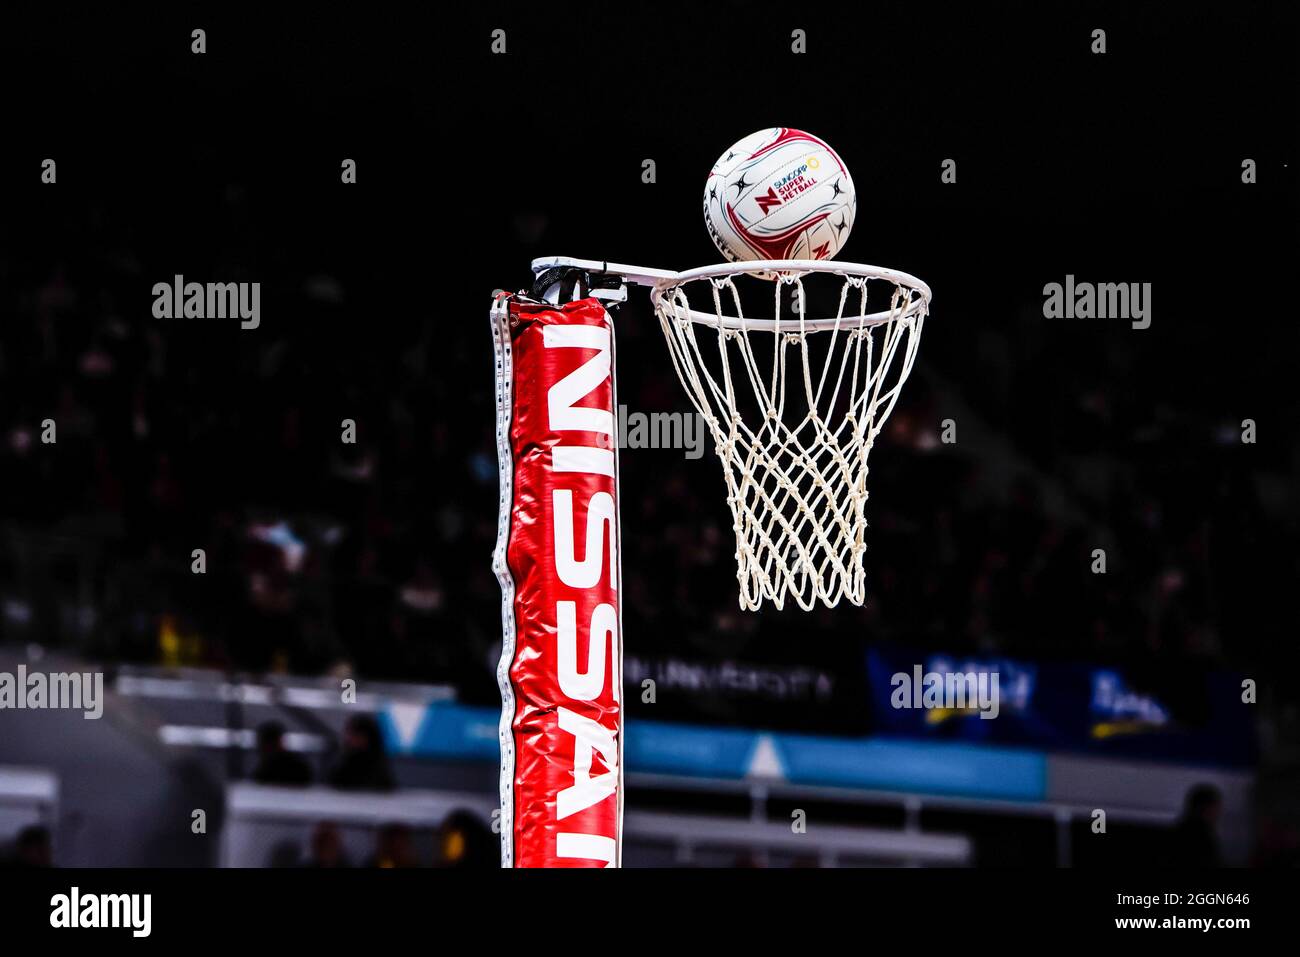 The ball flying into the net, during the Suncorp Super Netball 2019 Season Game 1 between Melbourne Vixens and Queensland Firebirds at Melbourne Arena, Melbourne Olympic Park.  Vixens won this home match with the score 73 - 61. Stock Photo